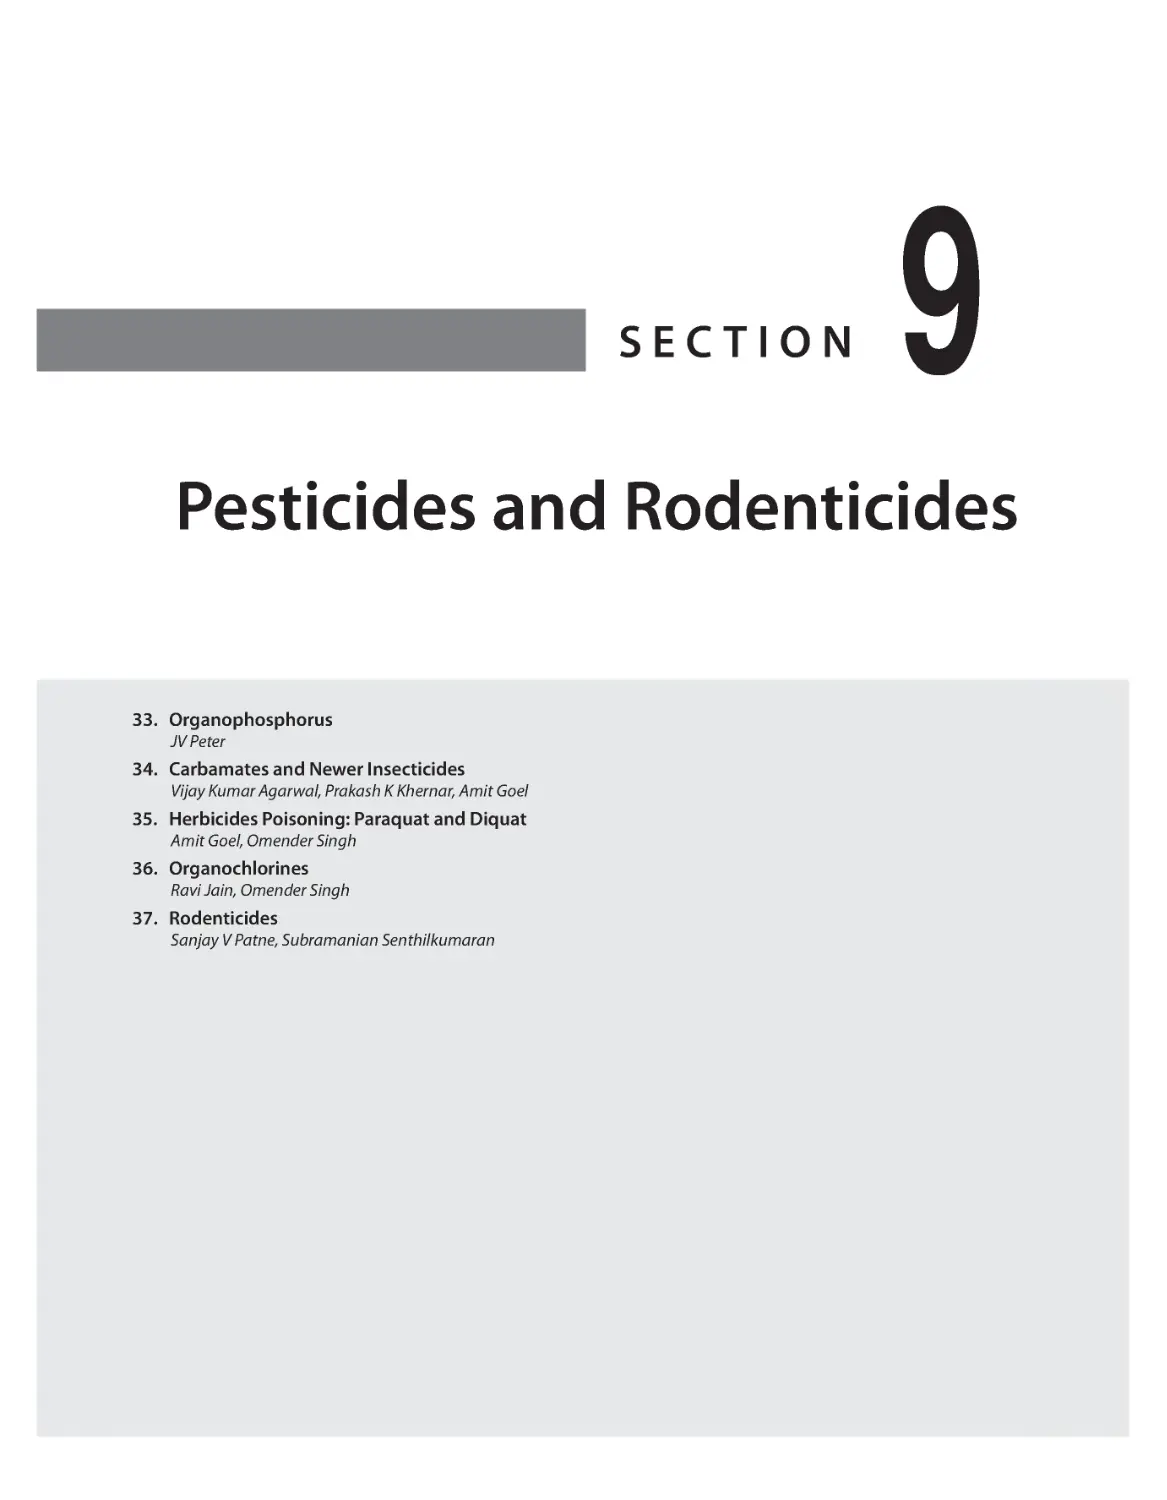 SECTION 9: Pesticides and Rodenticides